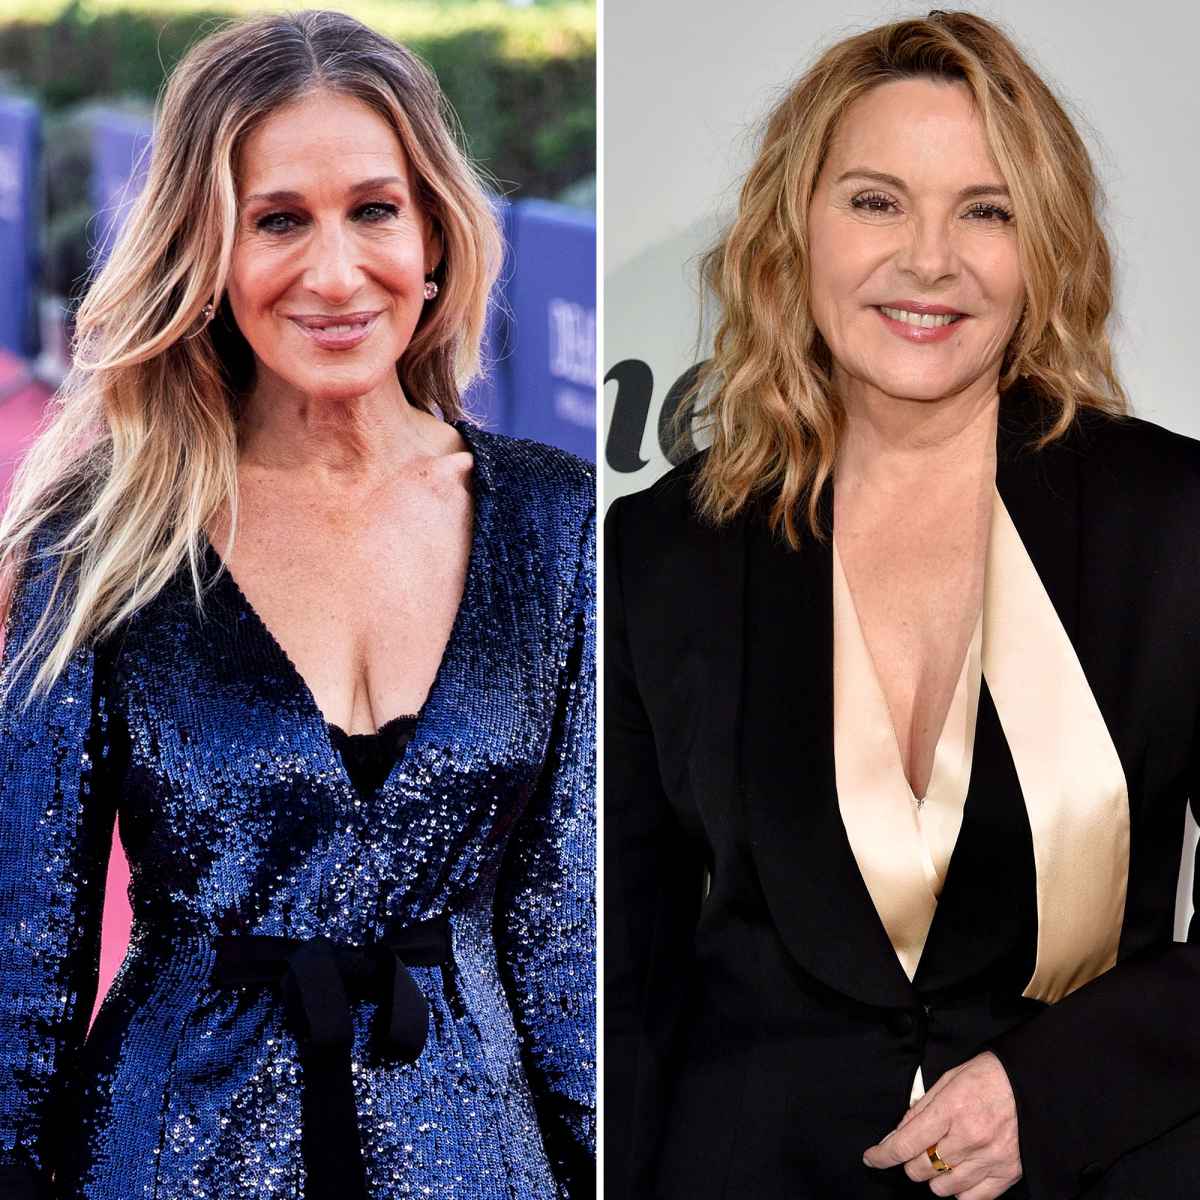 Austin Taylor Interracial - Sarah Jessica Parker Gets Real About 'Very Painful' Kim Cattrall Drama